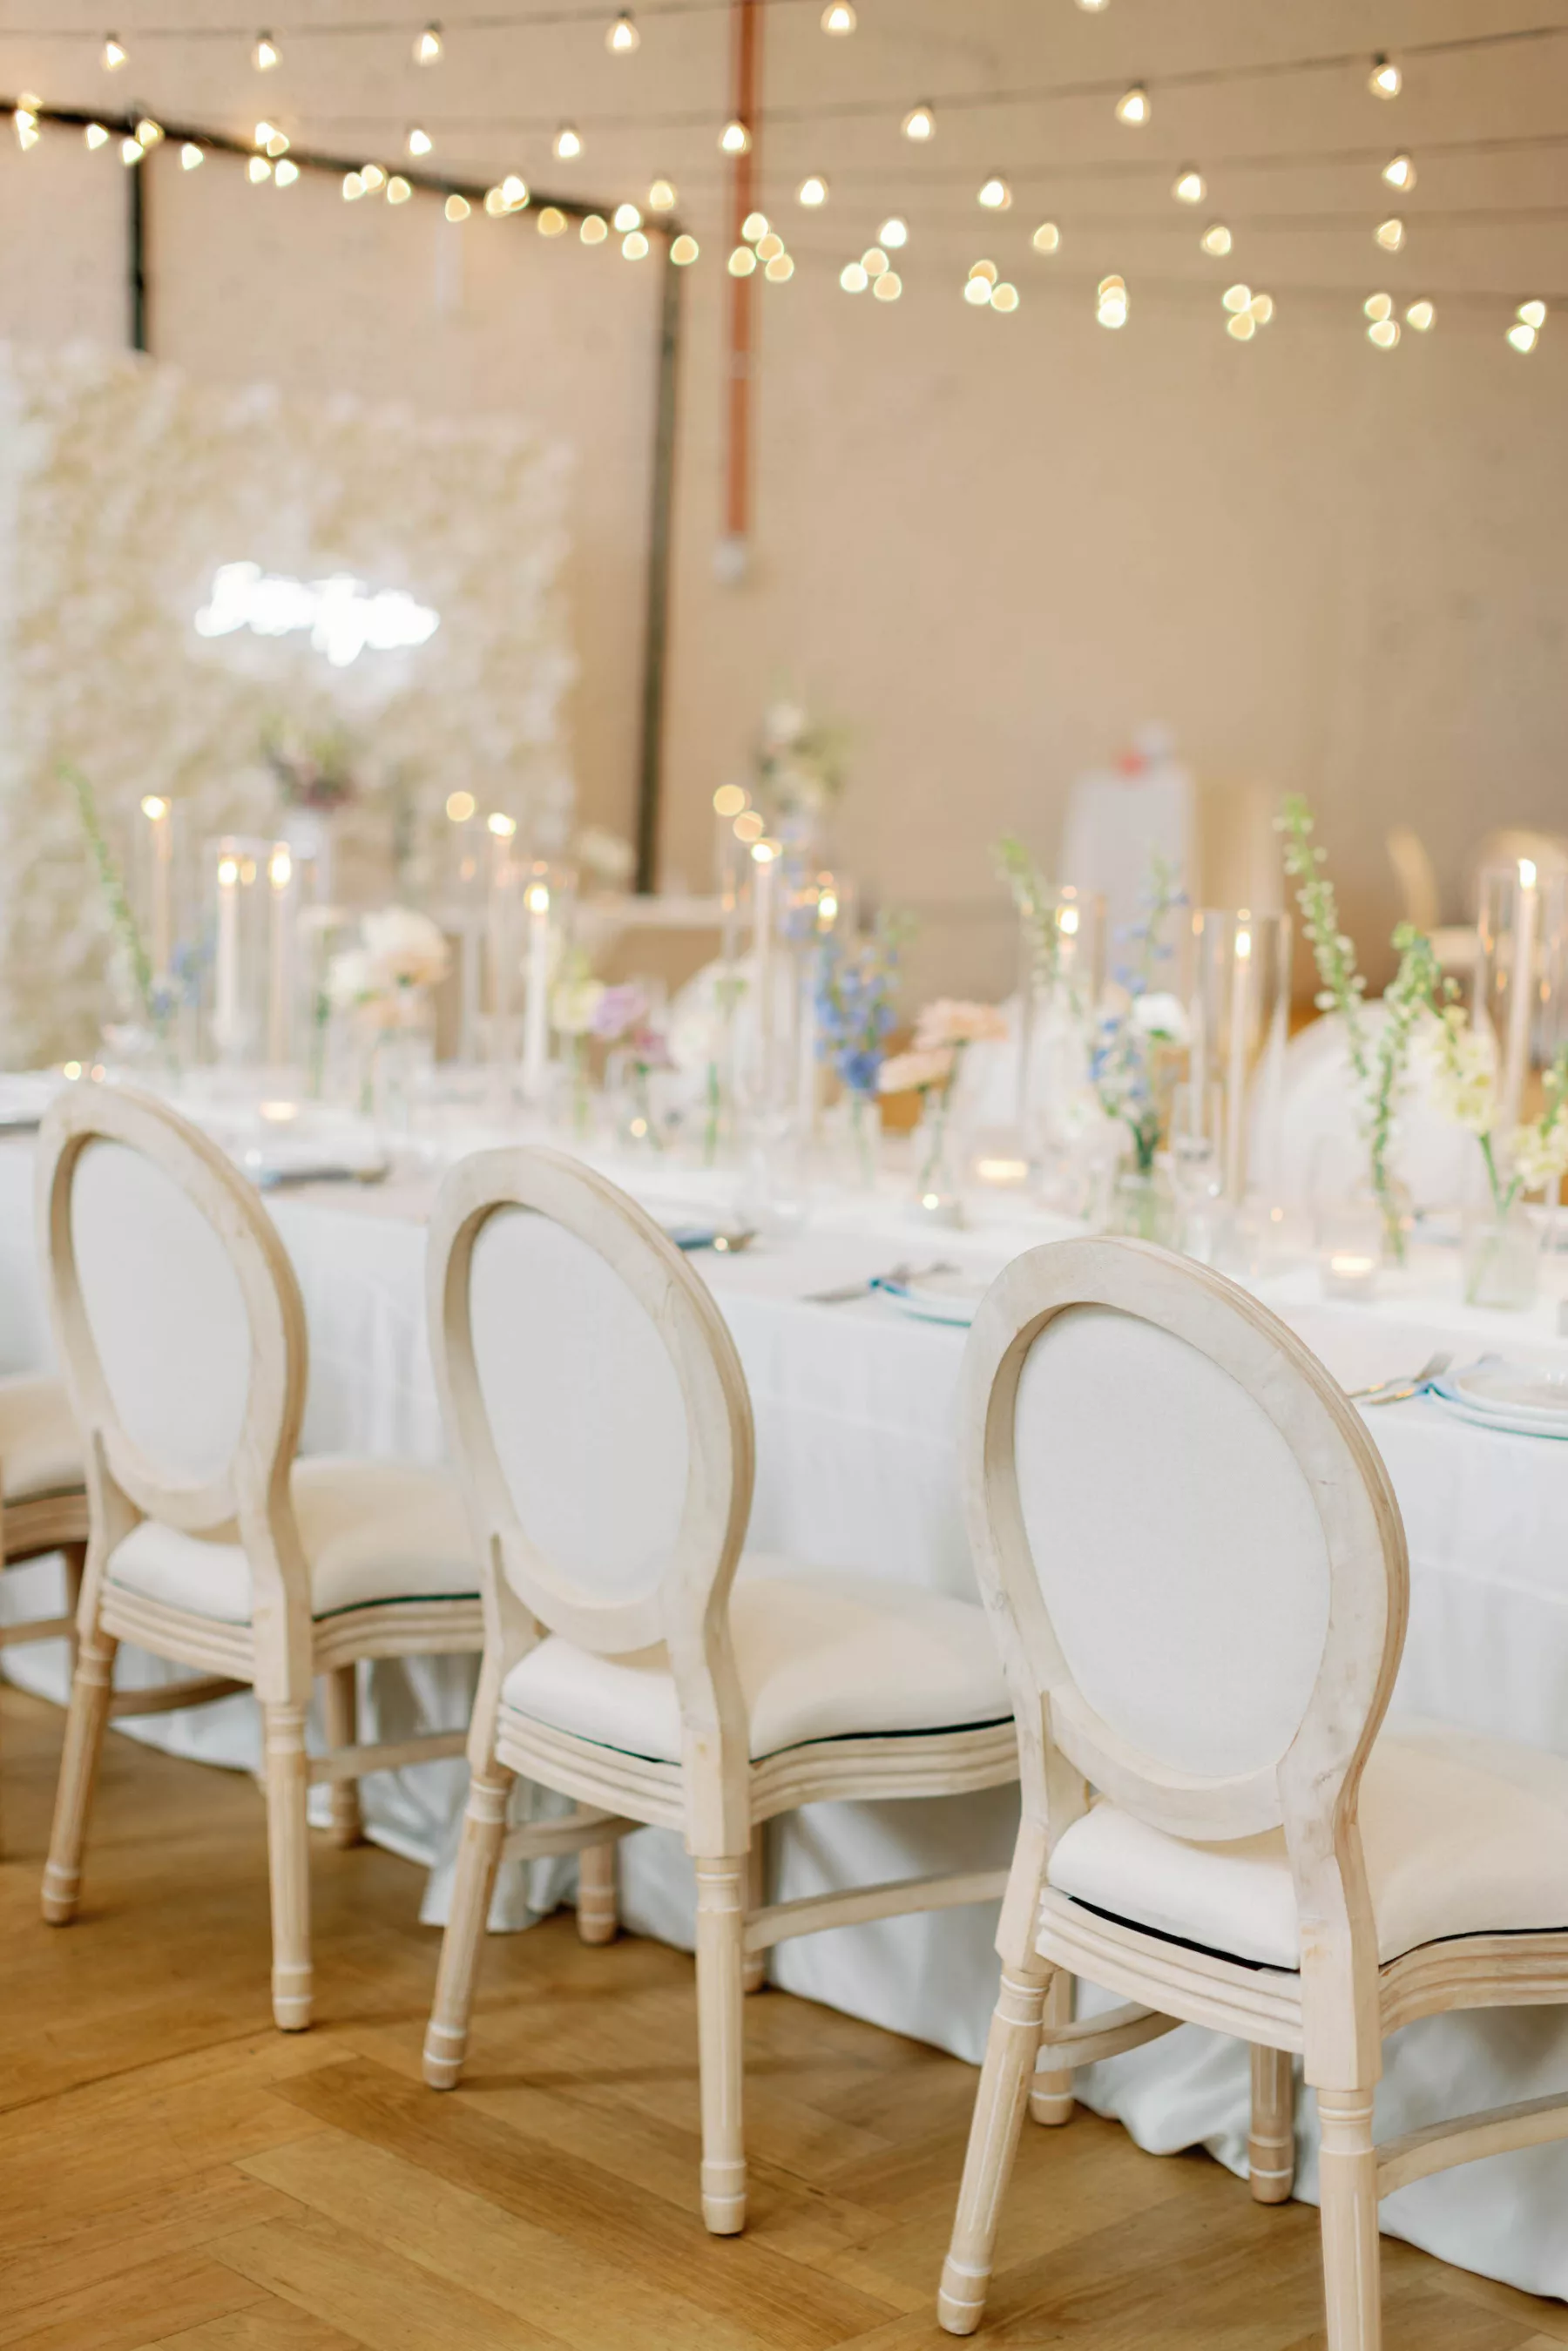 Whimsical White and Blue Wedding Reception Inspiration | Tampa Bay Event Planner The Olive Tree Weddings